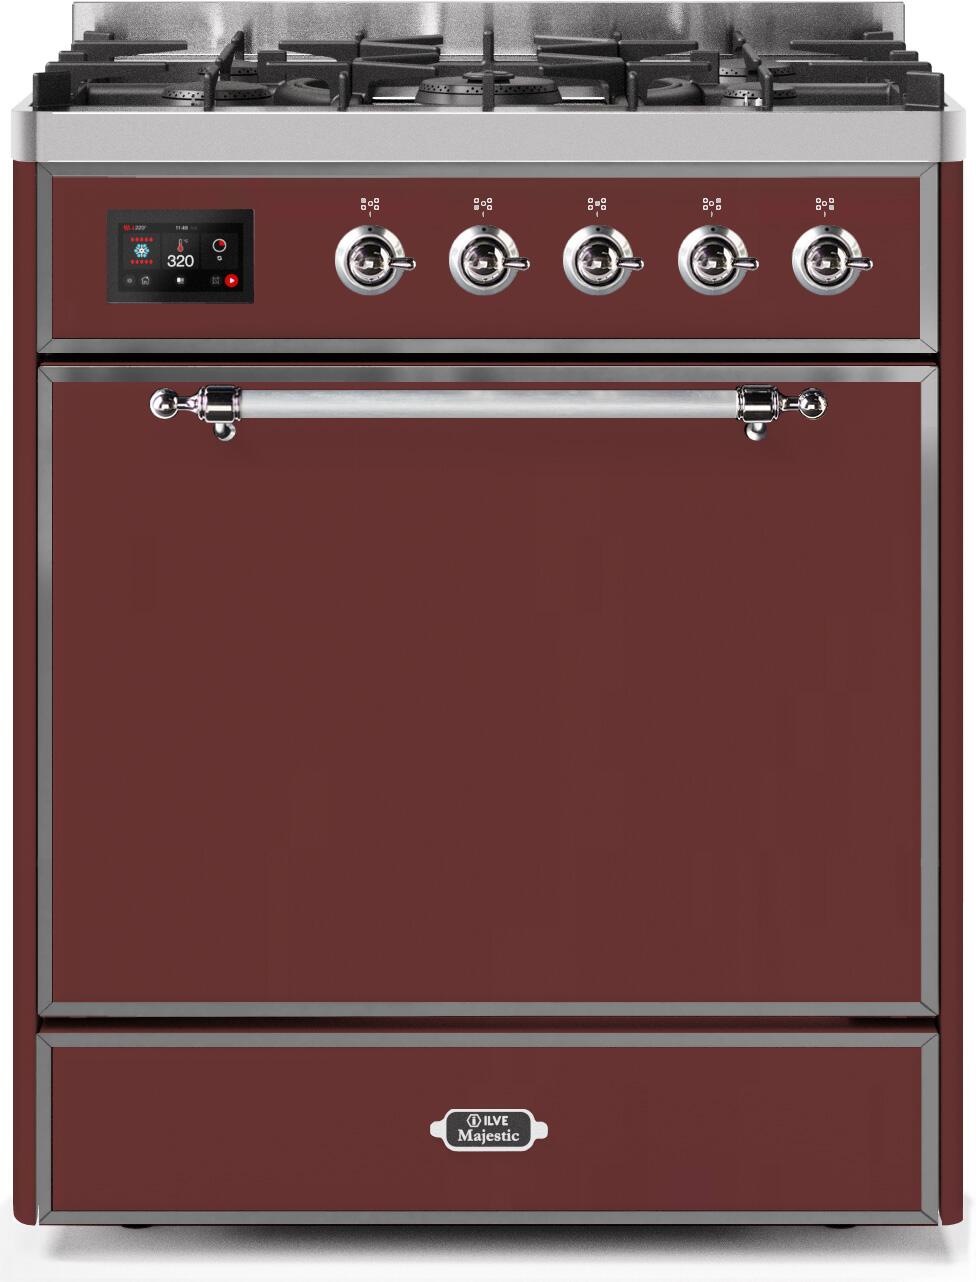 ondergoed Helder op Notitie ILVE Majestic 82 30-in Deep Recessed 5 Burners Convection Oven Freestanding  Dual Fuel Range (Burgundy/Chrome Trim) in the Single Oven Dual Fuel Ranges  department at Lowes.com